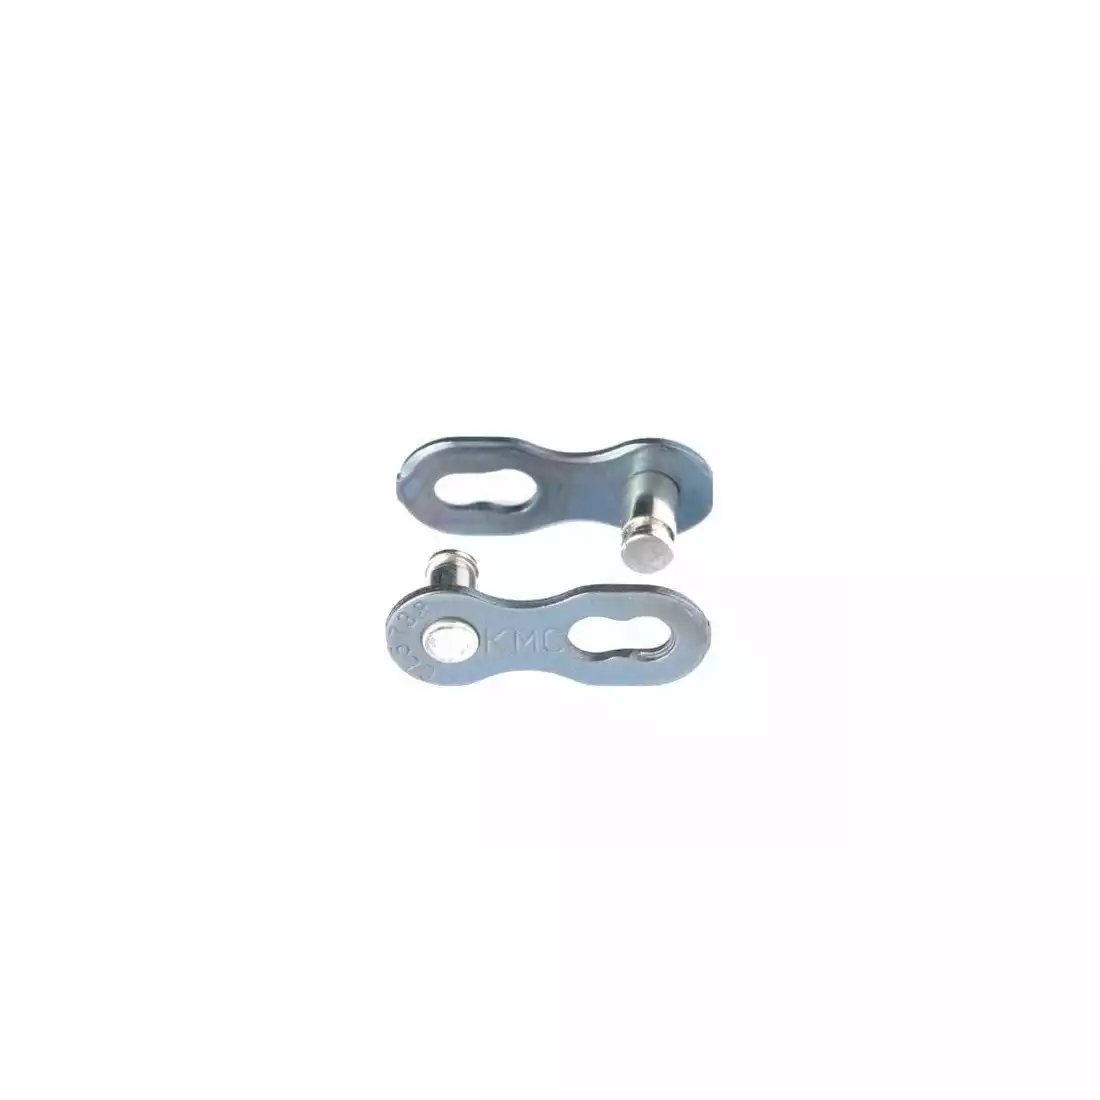 KMC CL552-EPT 12-speed bicycle chain clip, 2 pieces, silver